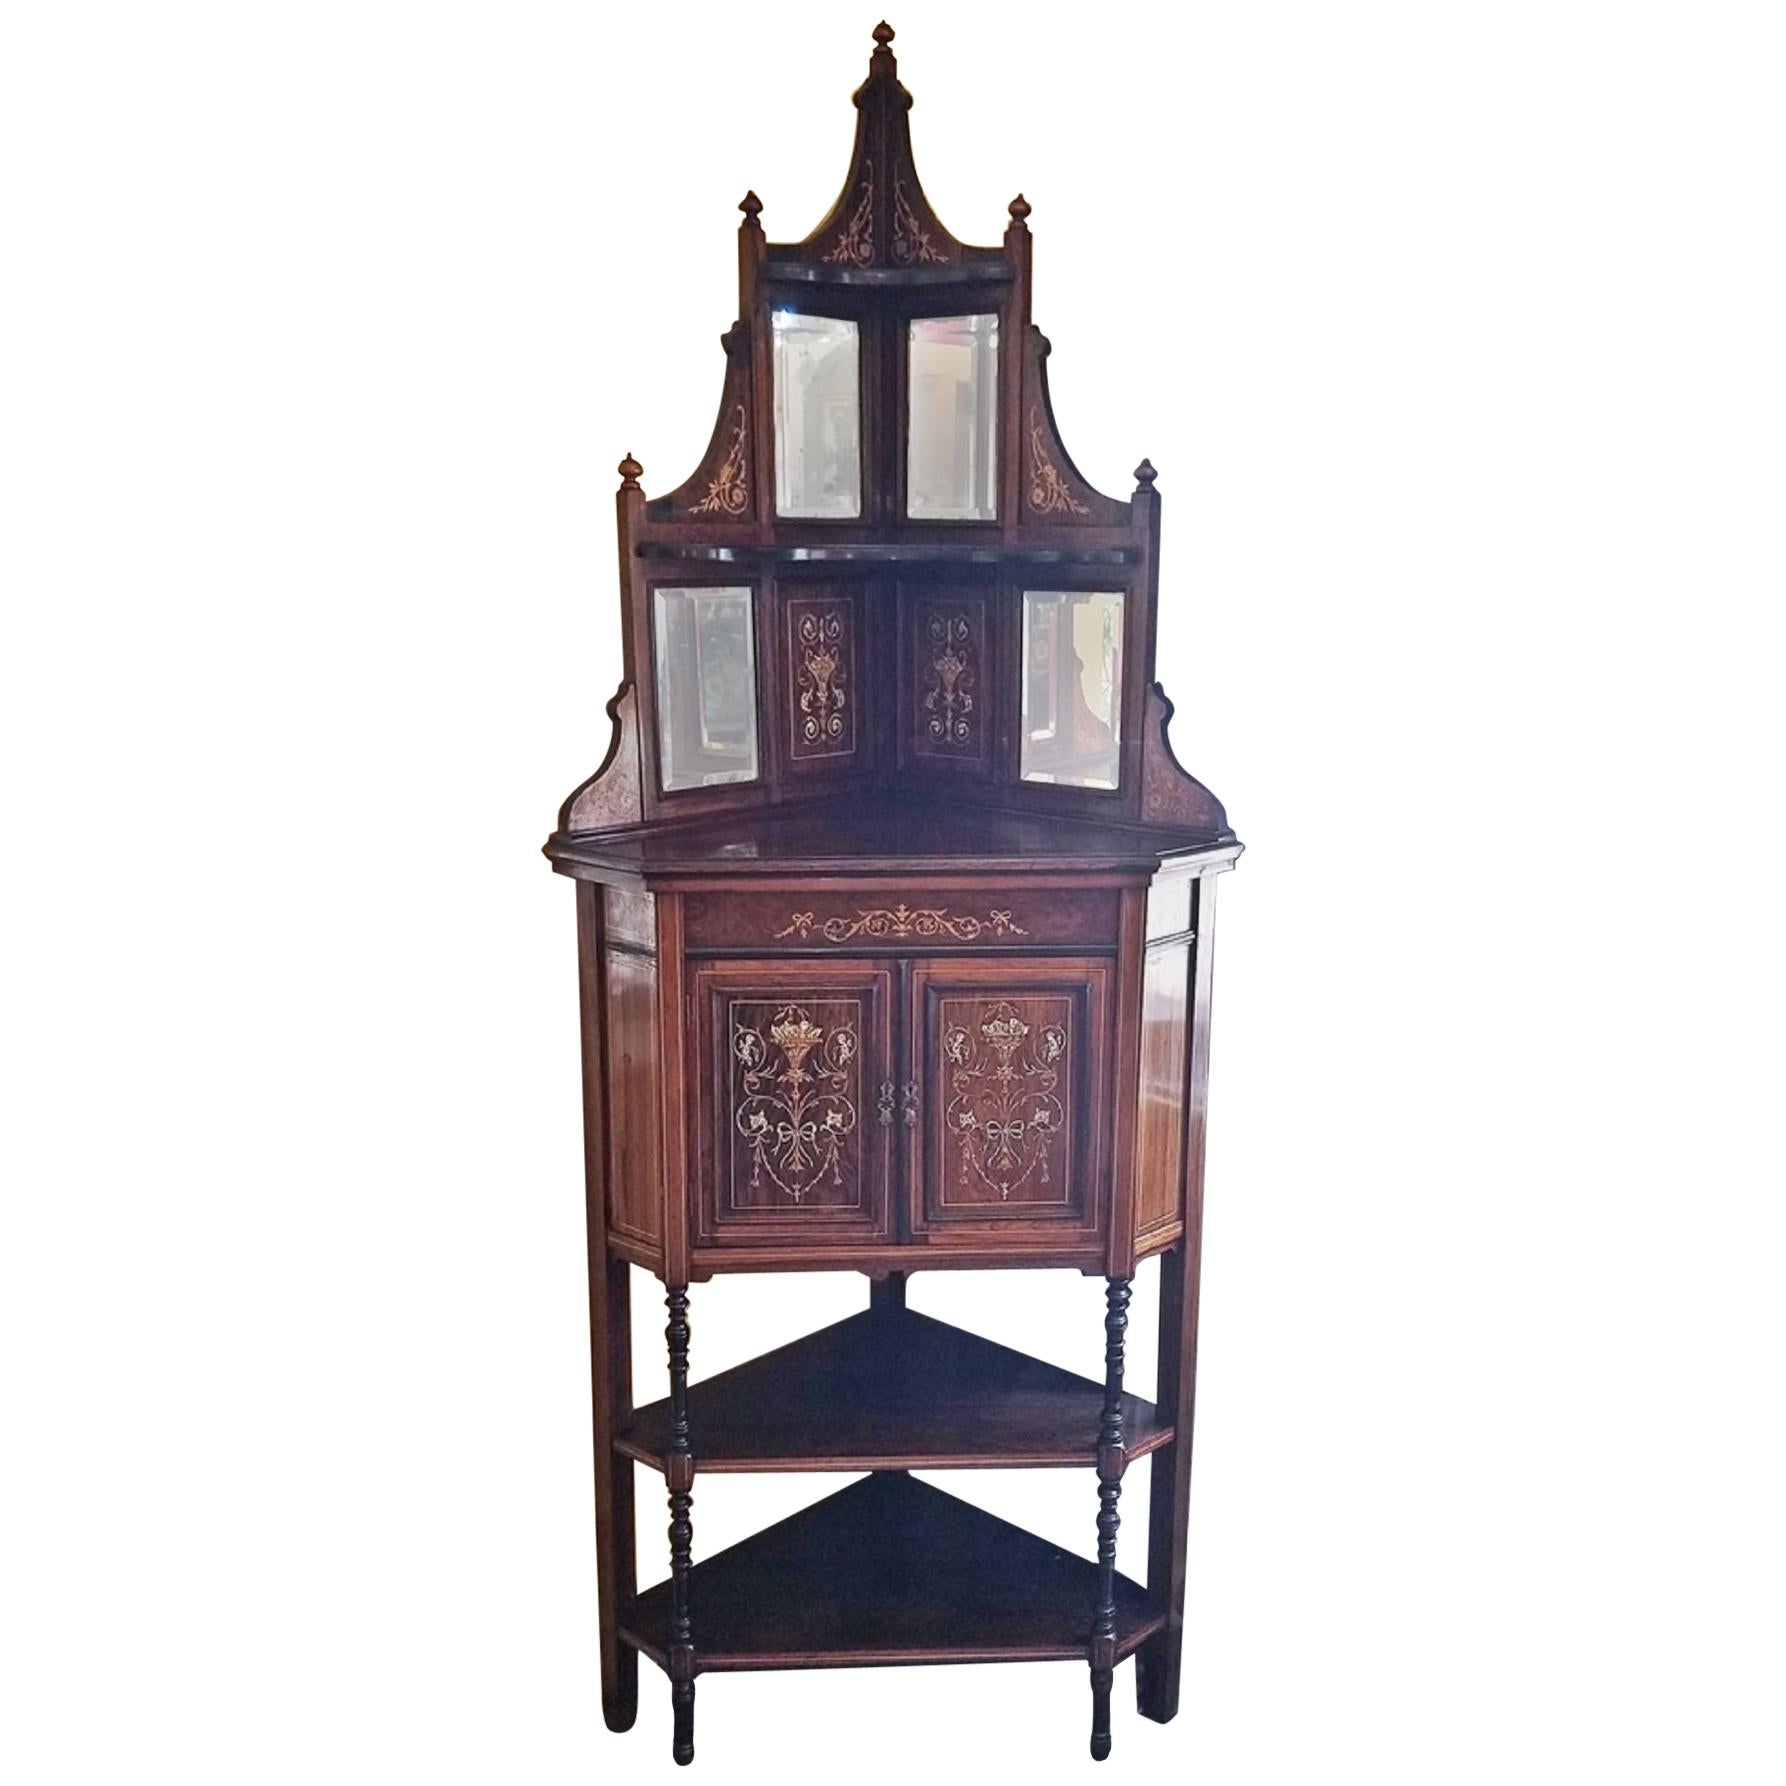 19C English Marquetry Inlaid Corner Cabinet Attributed to Collinson and Lock For Sale